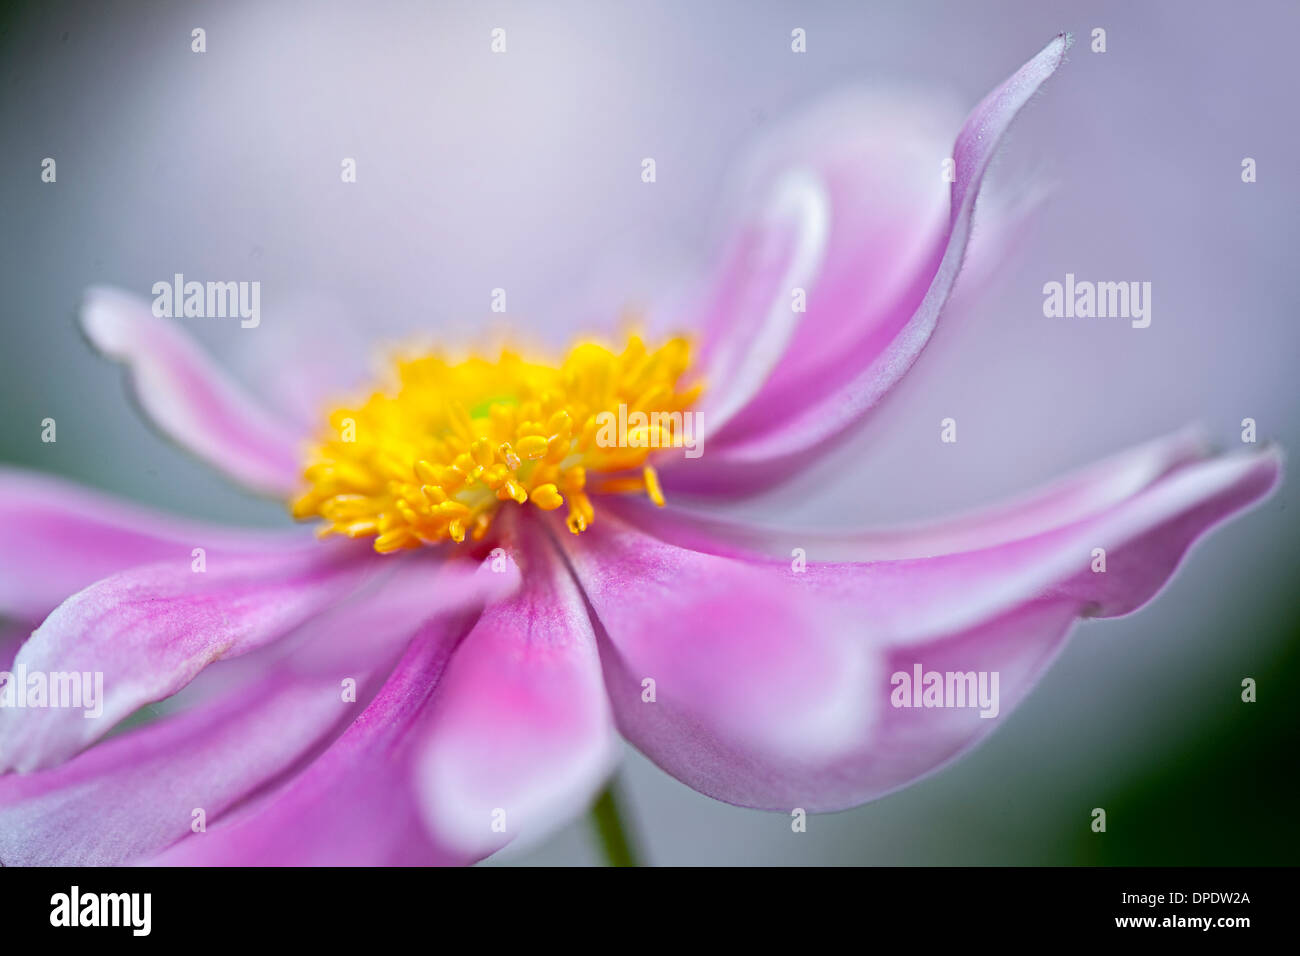 Close-up image of a single pink Japanese Anemone  Flower Stock Photo